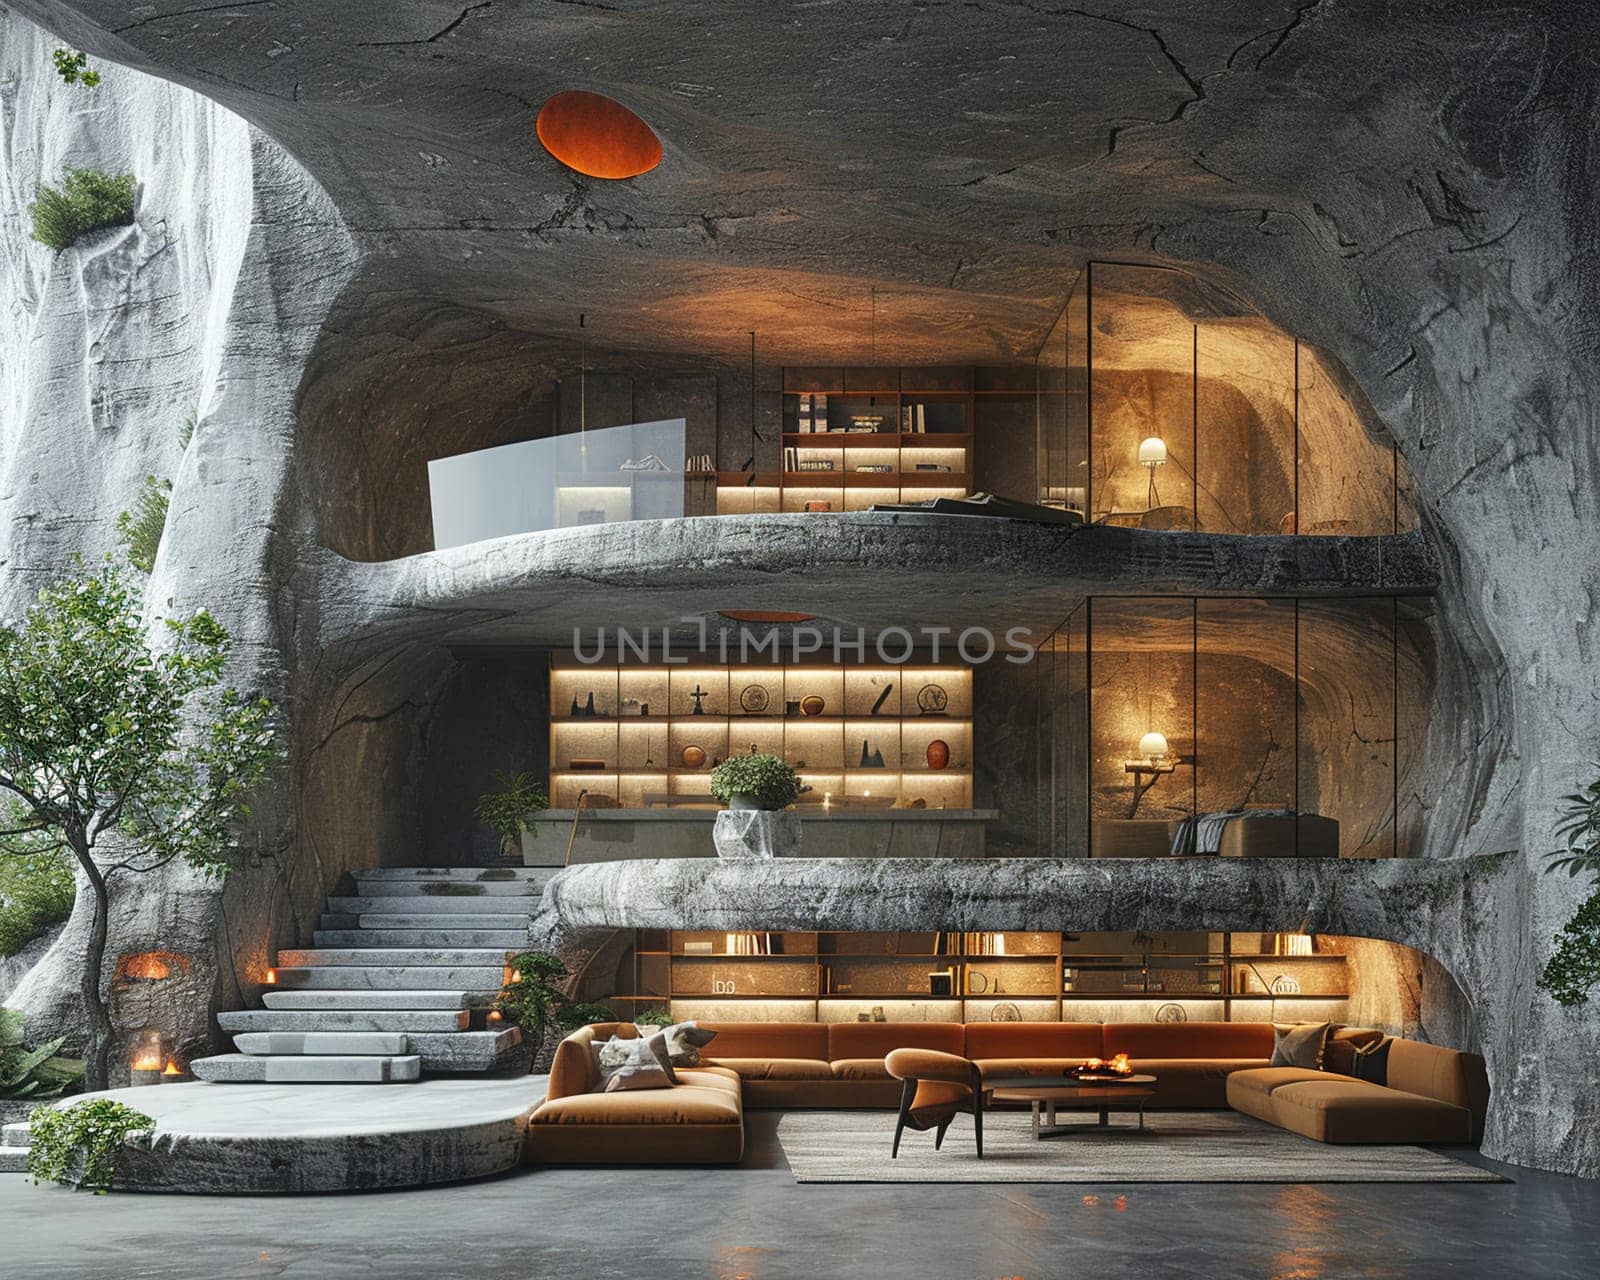 Post-apocalyptic bunker turned modern living space with innovative survival features.3D render. by Benzoix